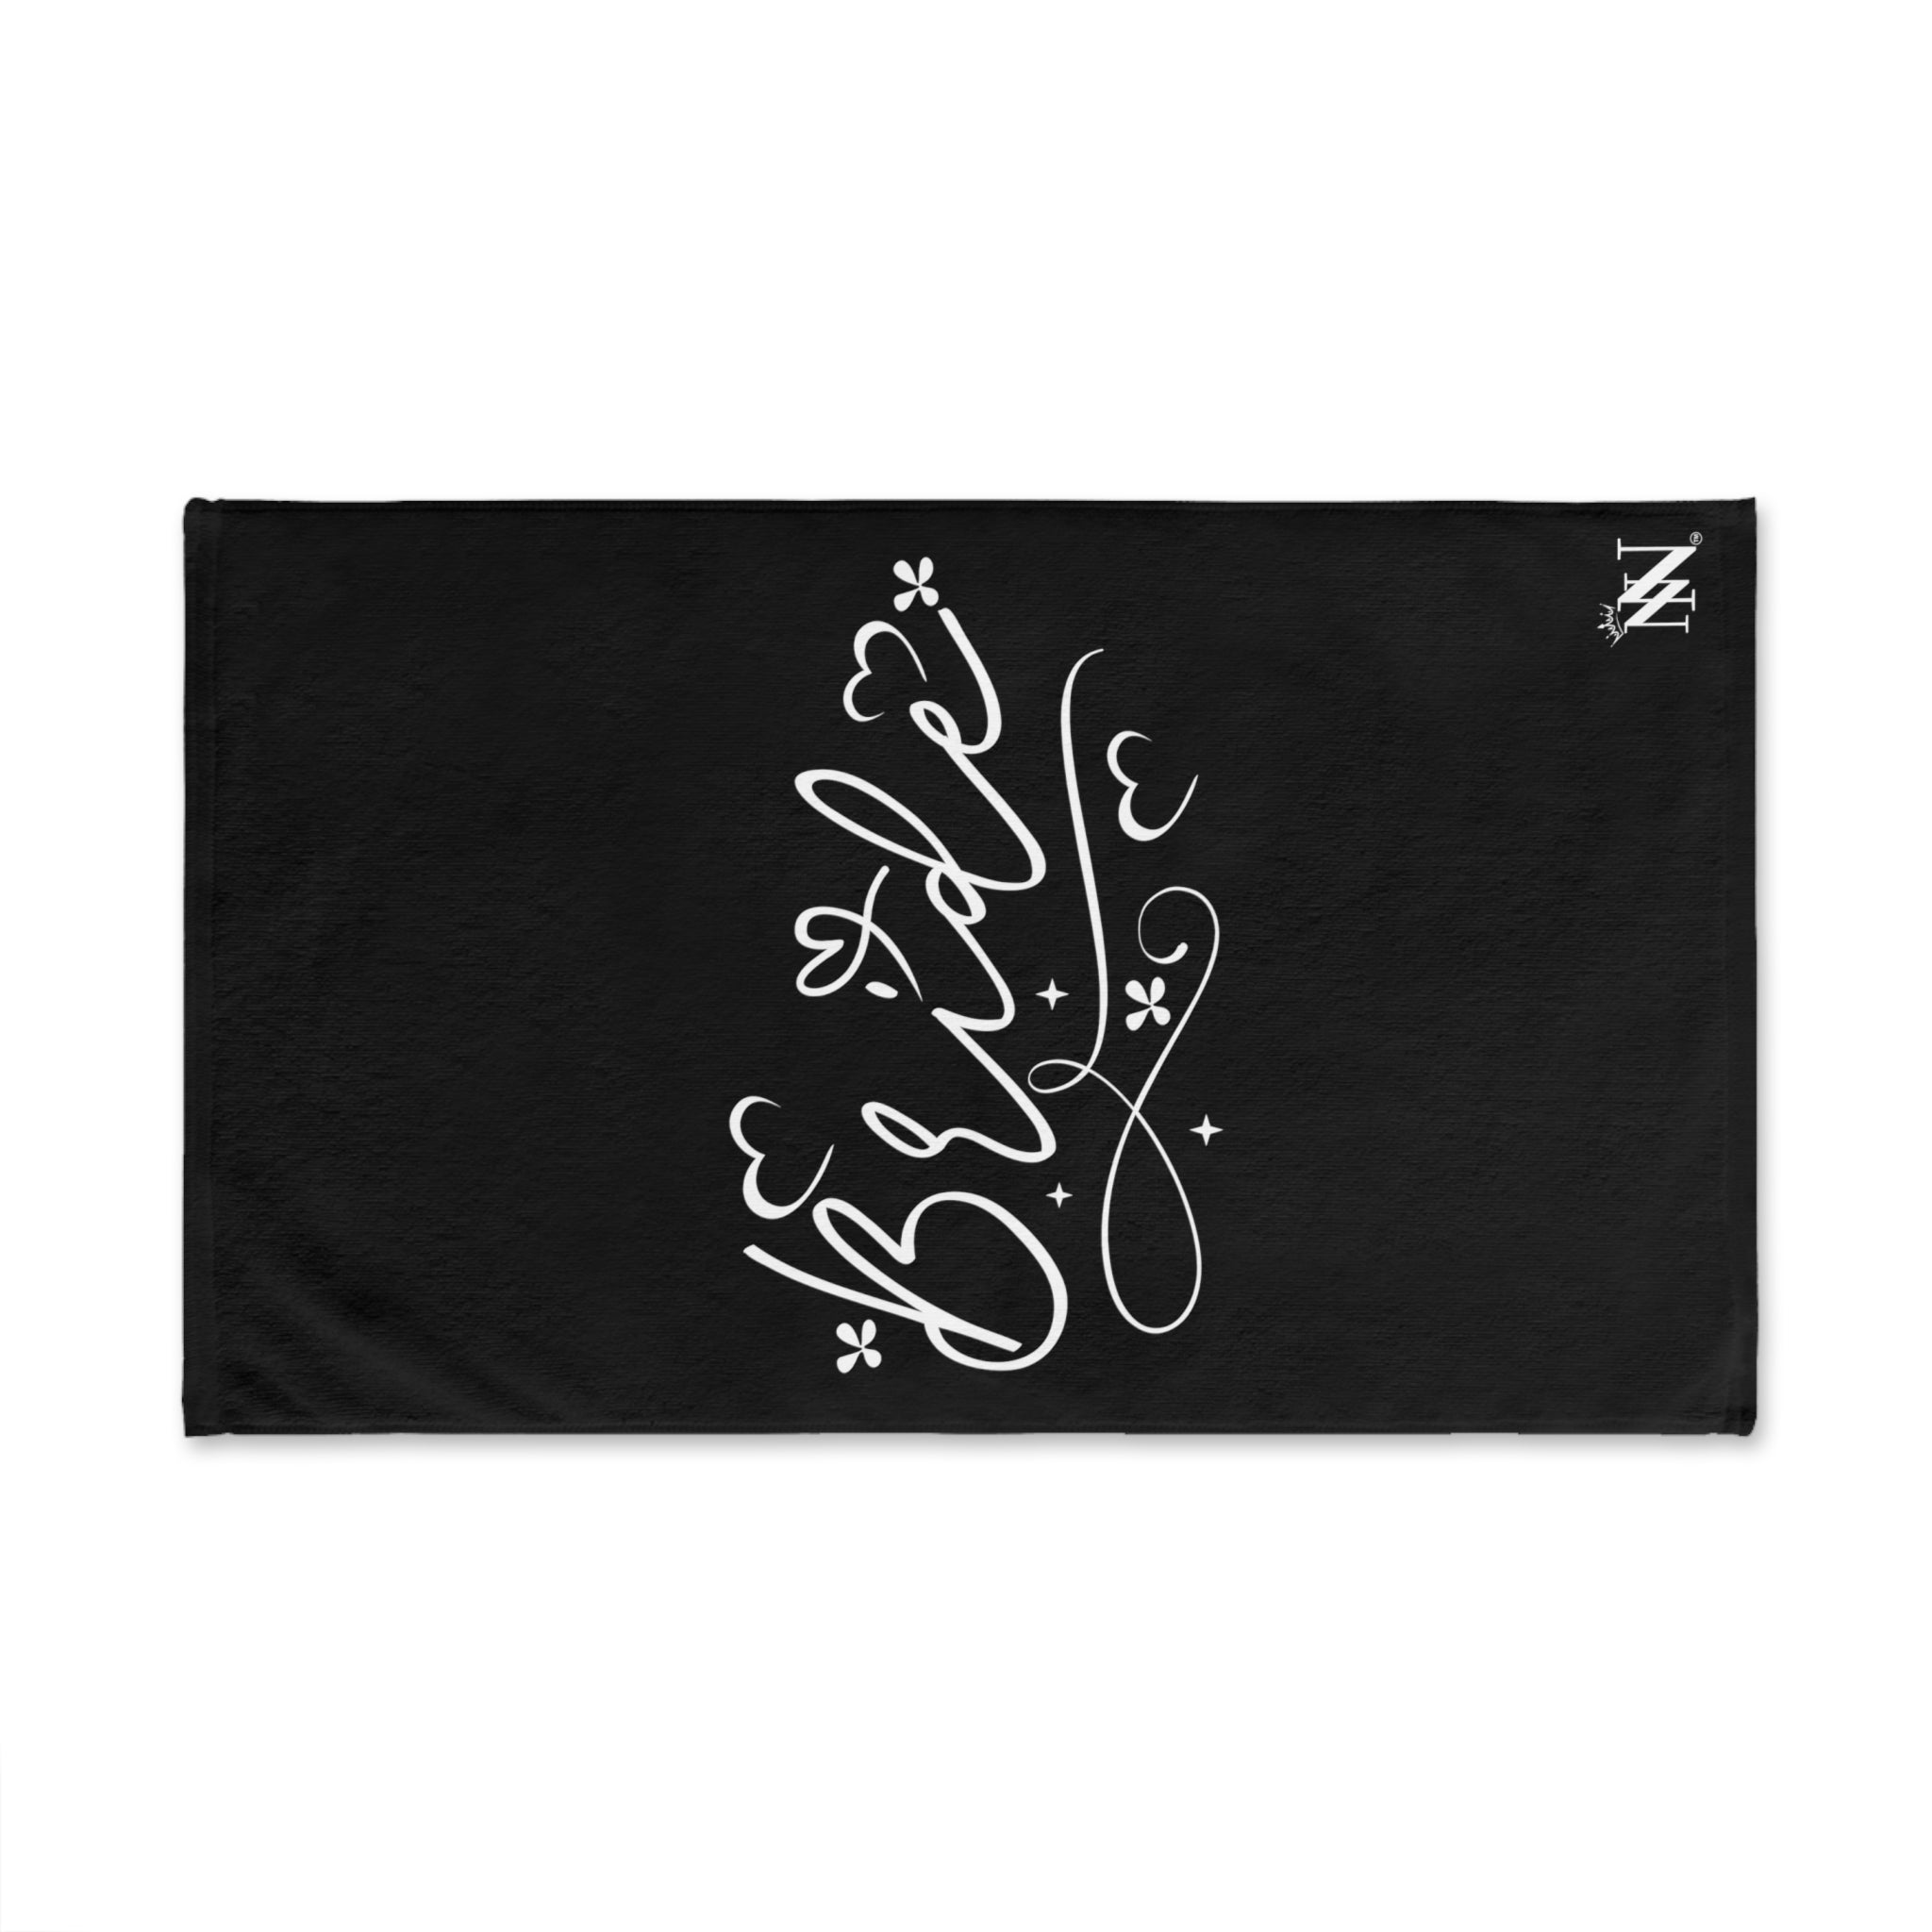 Bridal Heart Script Black | Sexy Gifts for Boyfriend, Funny Towel Romantic Gift for Wedding Couple Fiance First Year 2nd Anniversary Valentines, Party Gag Gifts, Joke Humor Cloth for Husband Men BF NECTAR NAPKINS